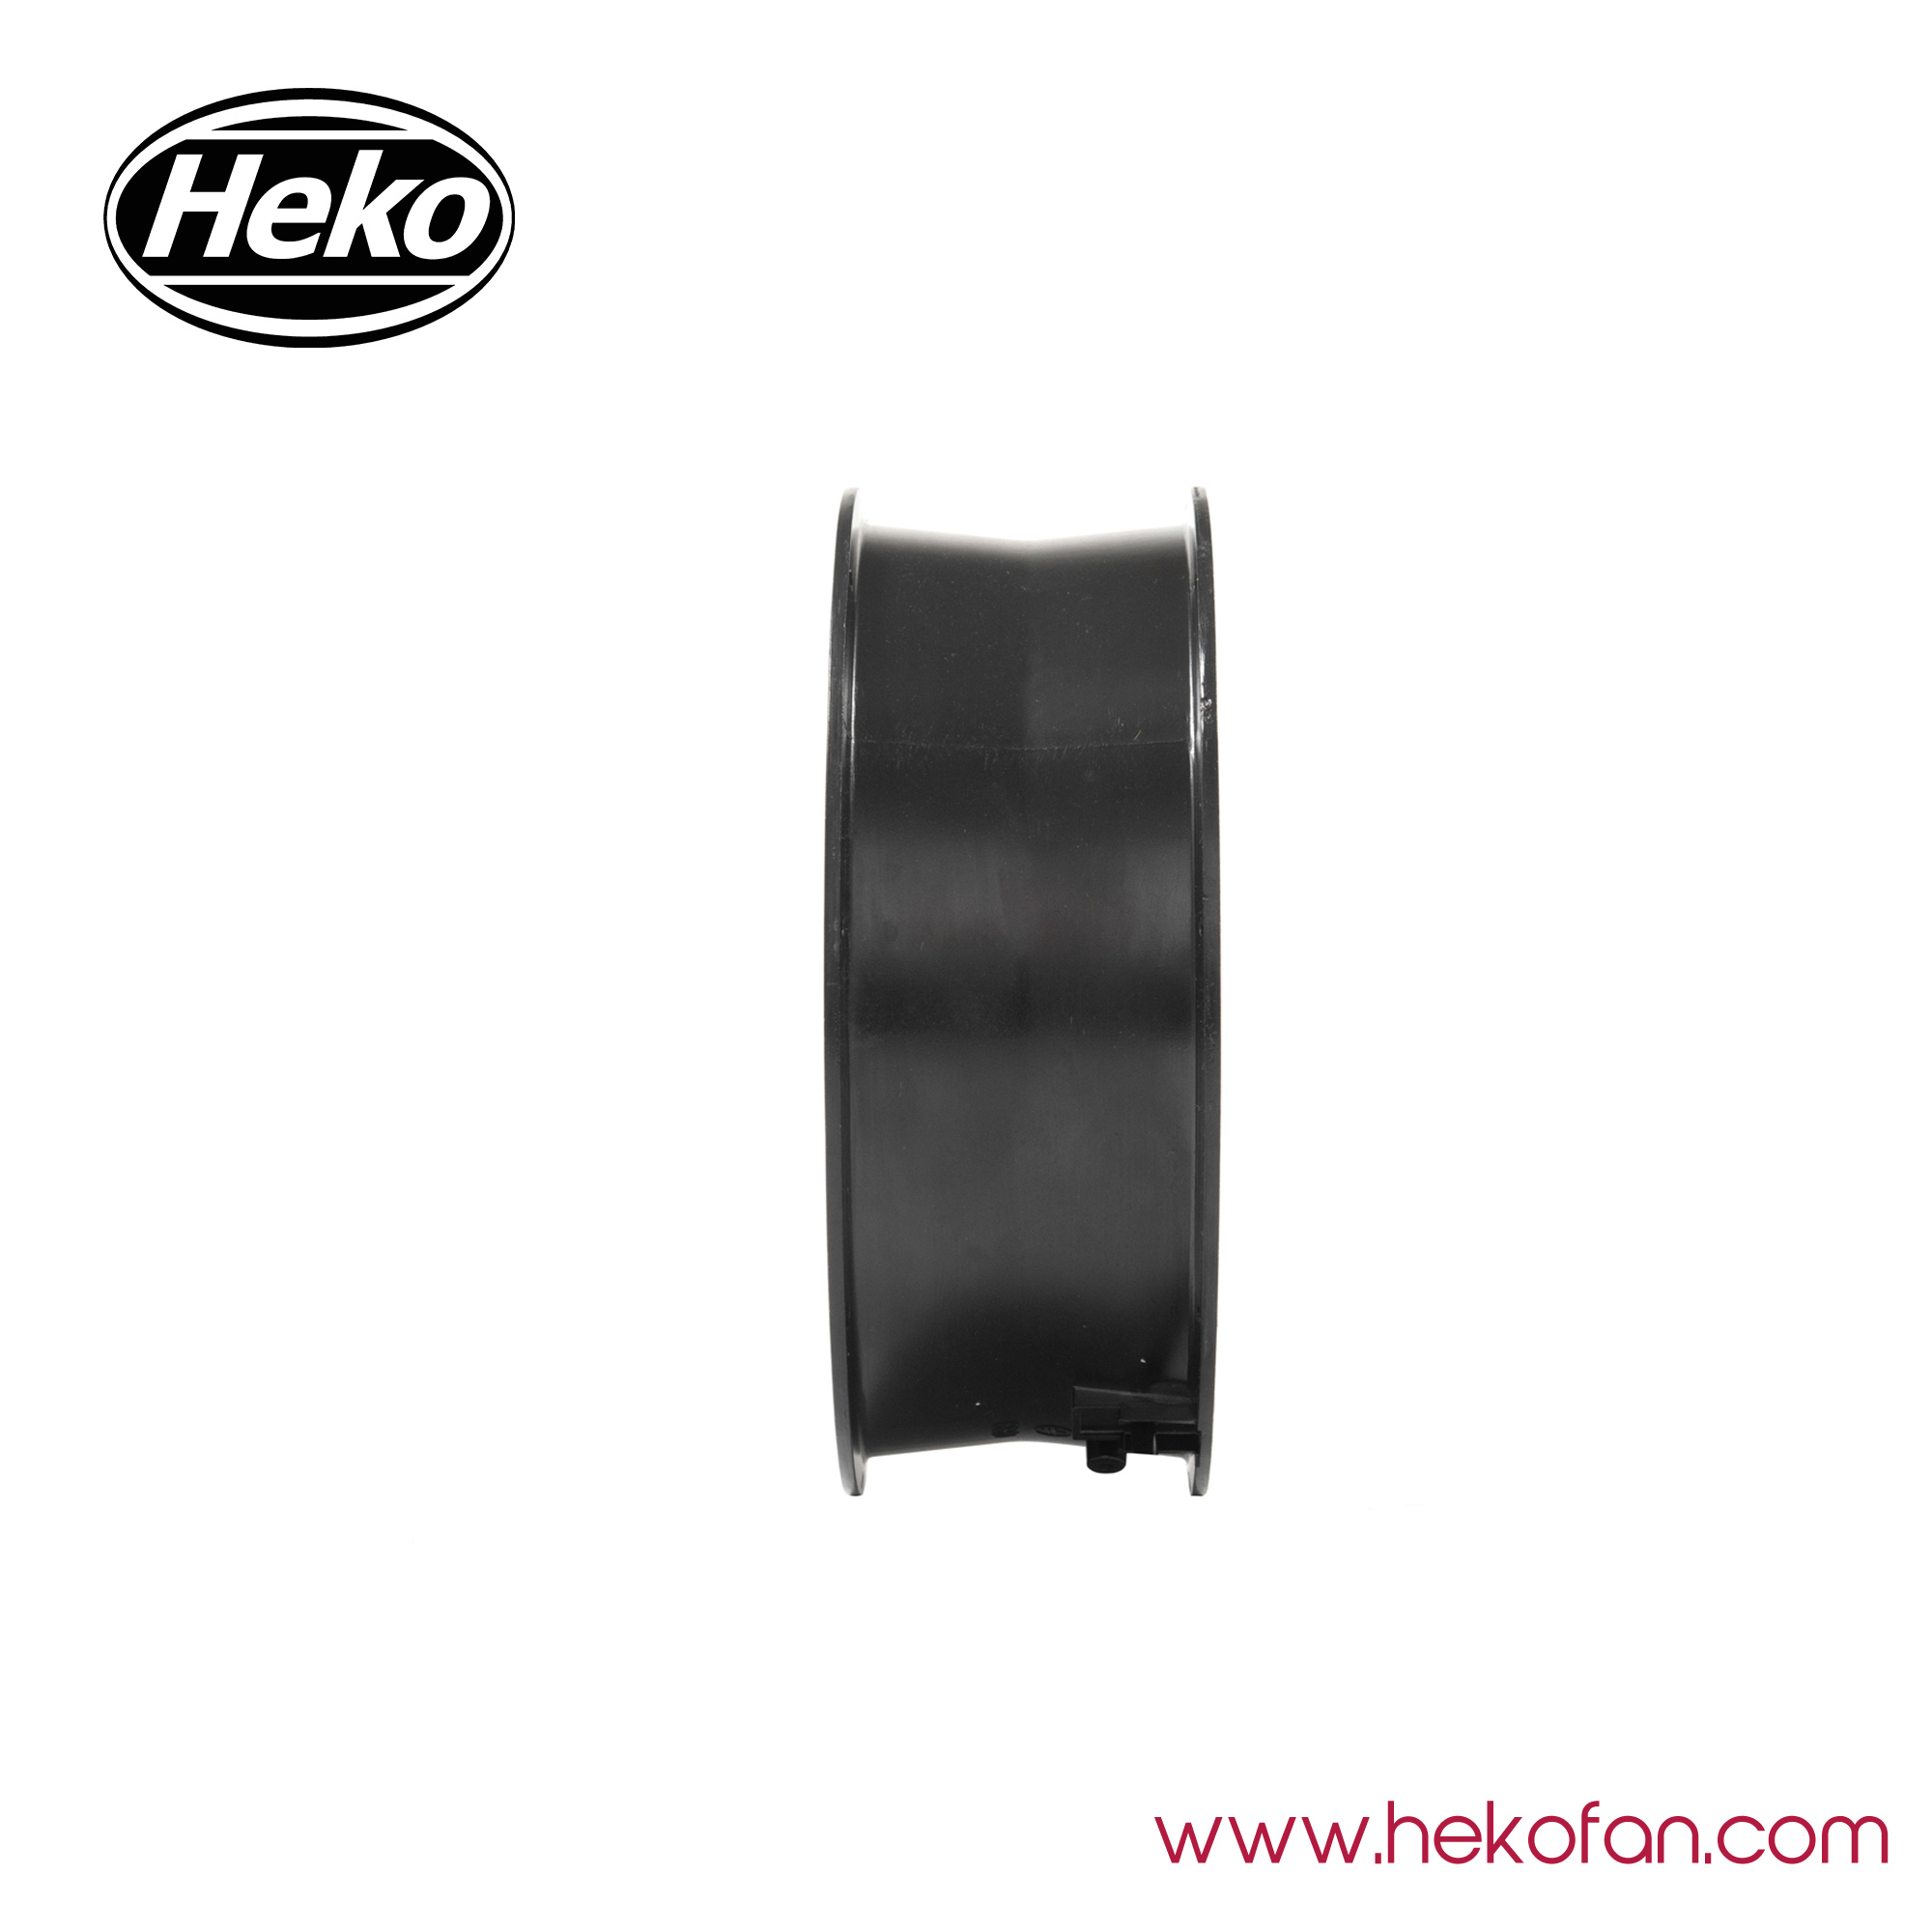 HEKO DC215mm Stainless Steel Axial Industrial Fan For Animals